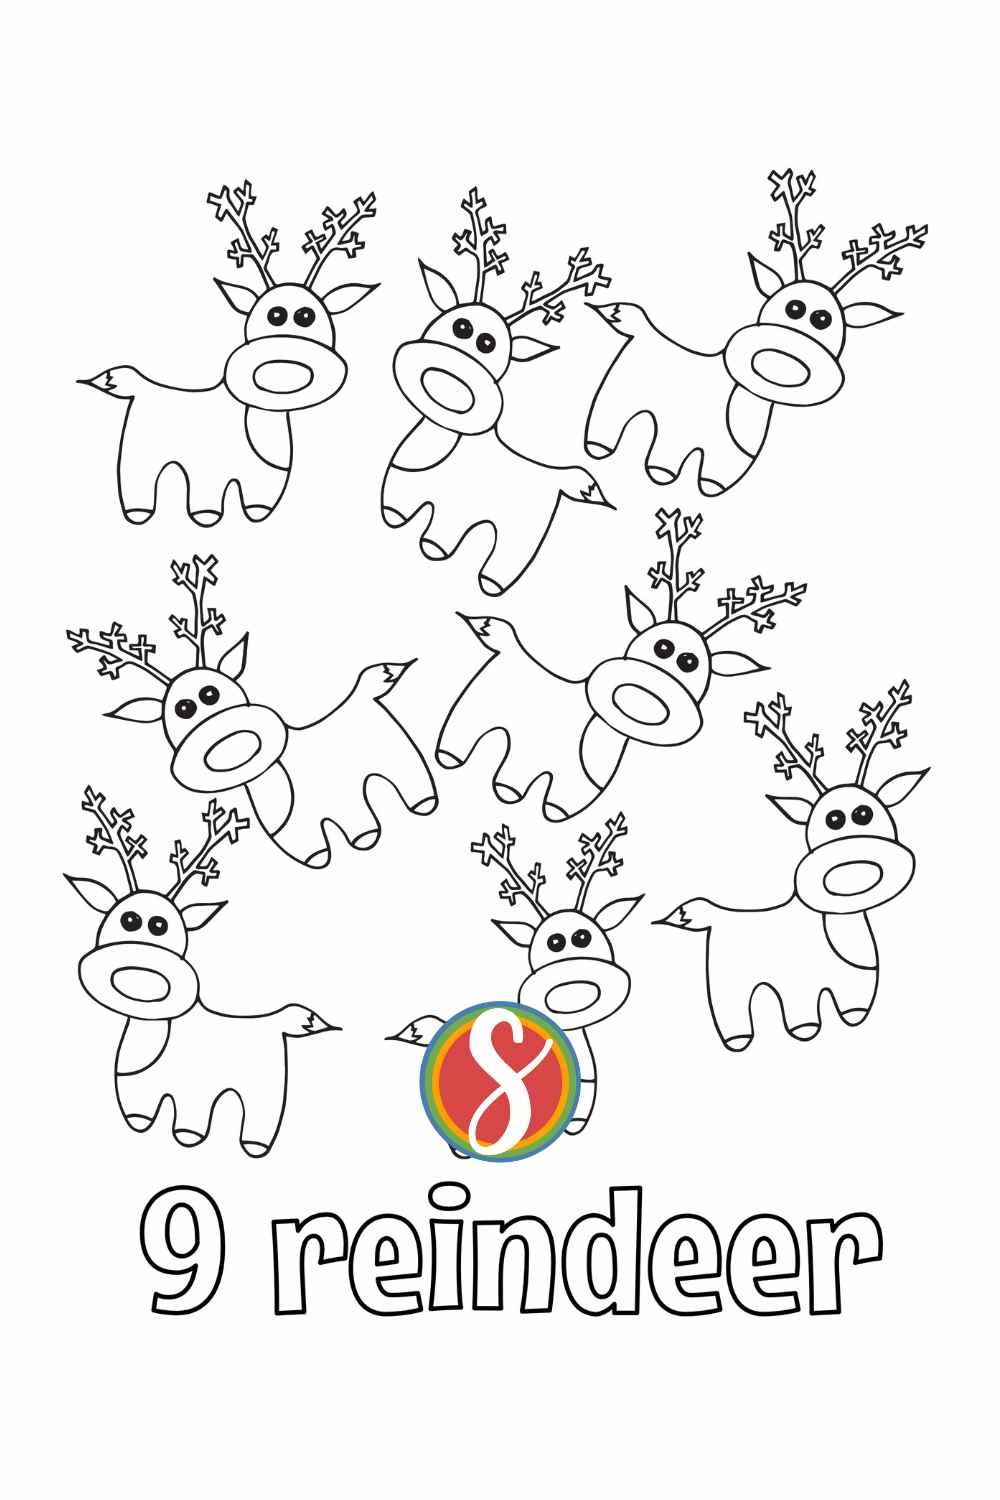 9 reindeer to color and colorable text "9 reindeer"